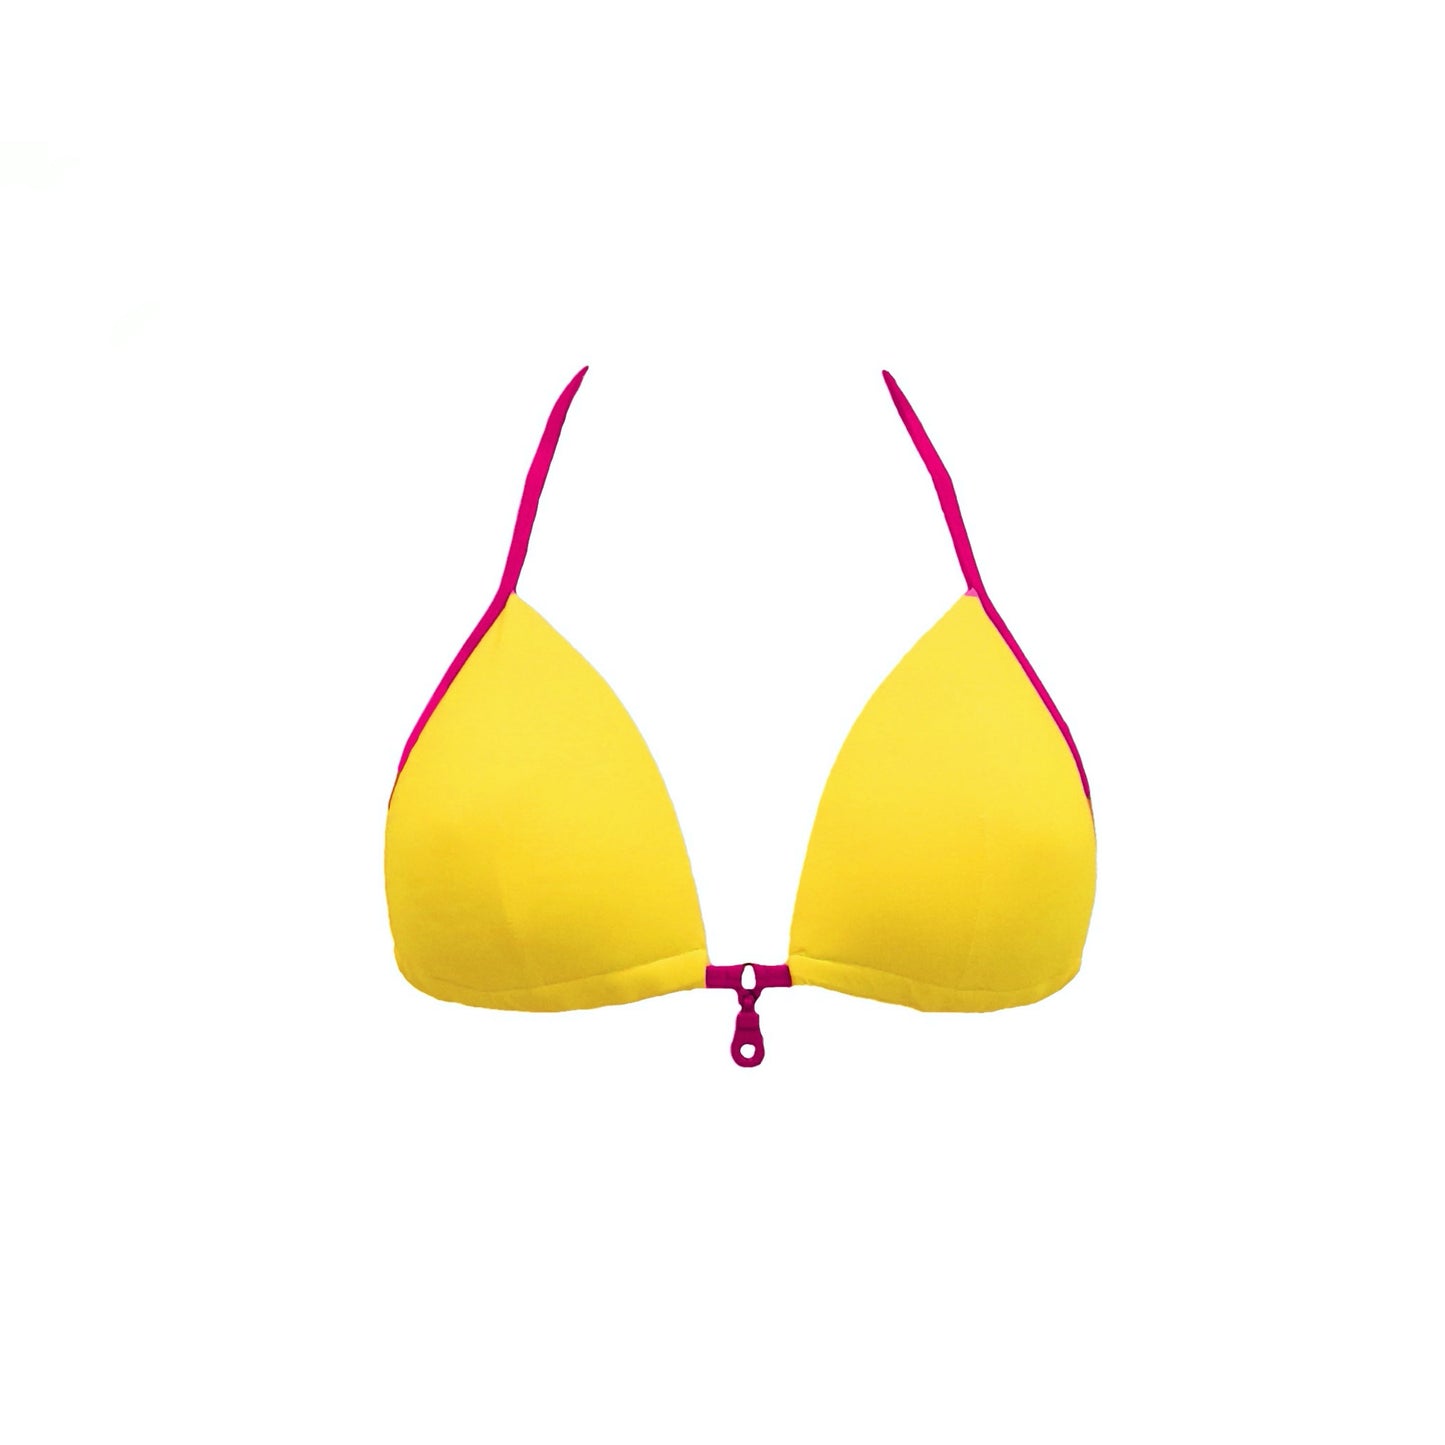 Totally adjustable yellow bikini set with push-up bra and bottom. Pink straps and zipper detail. Really comfortable for pool or beach. This bikini will never upset you, it will alway be one of your favorites. Parte superior bikini de lazos. Parte superior bikini amarillo.